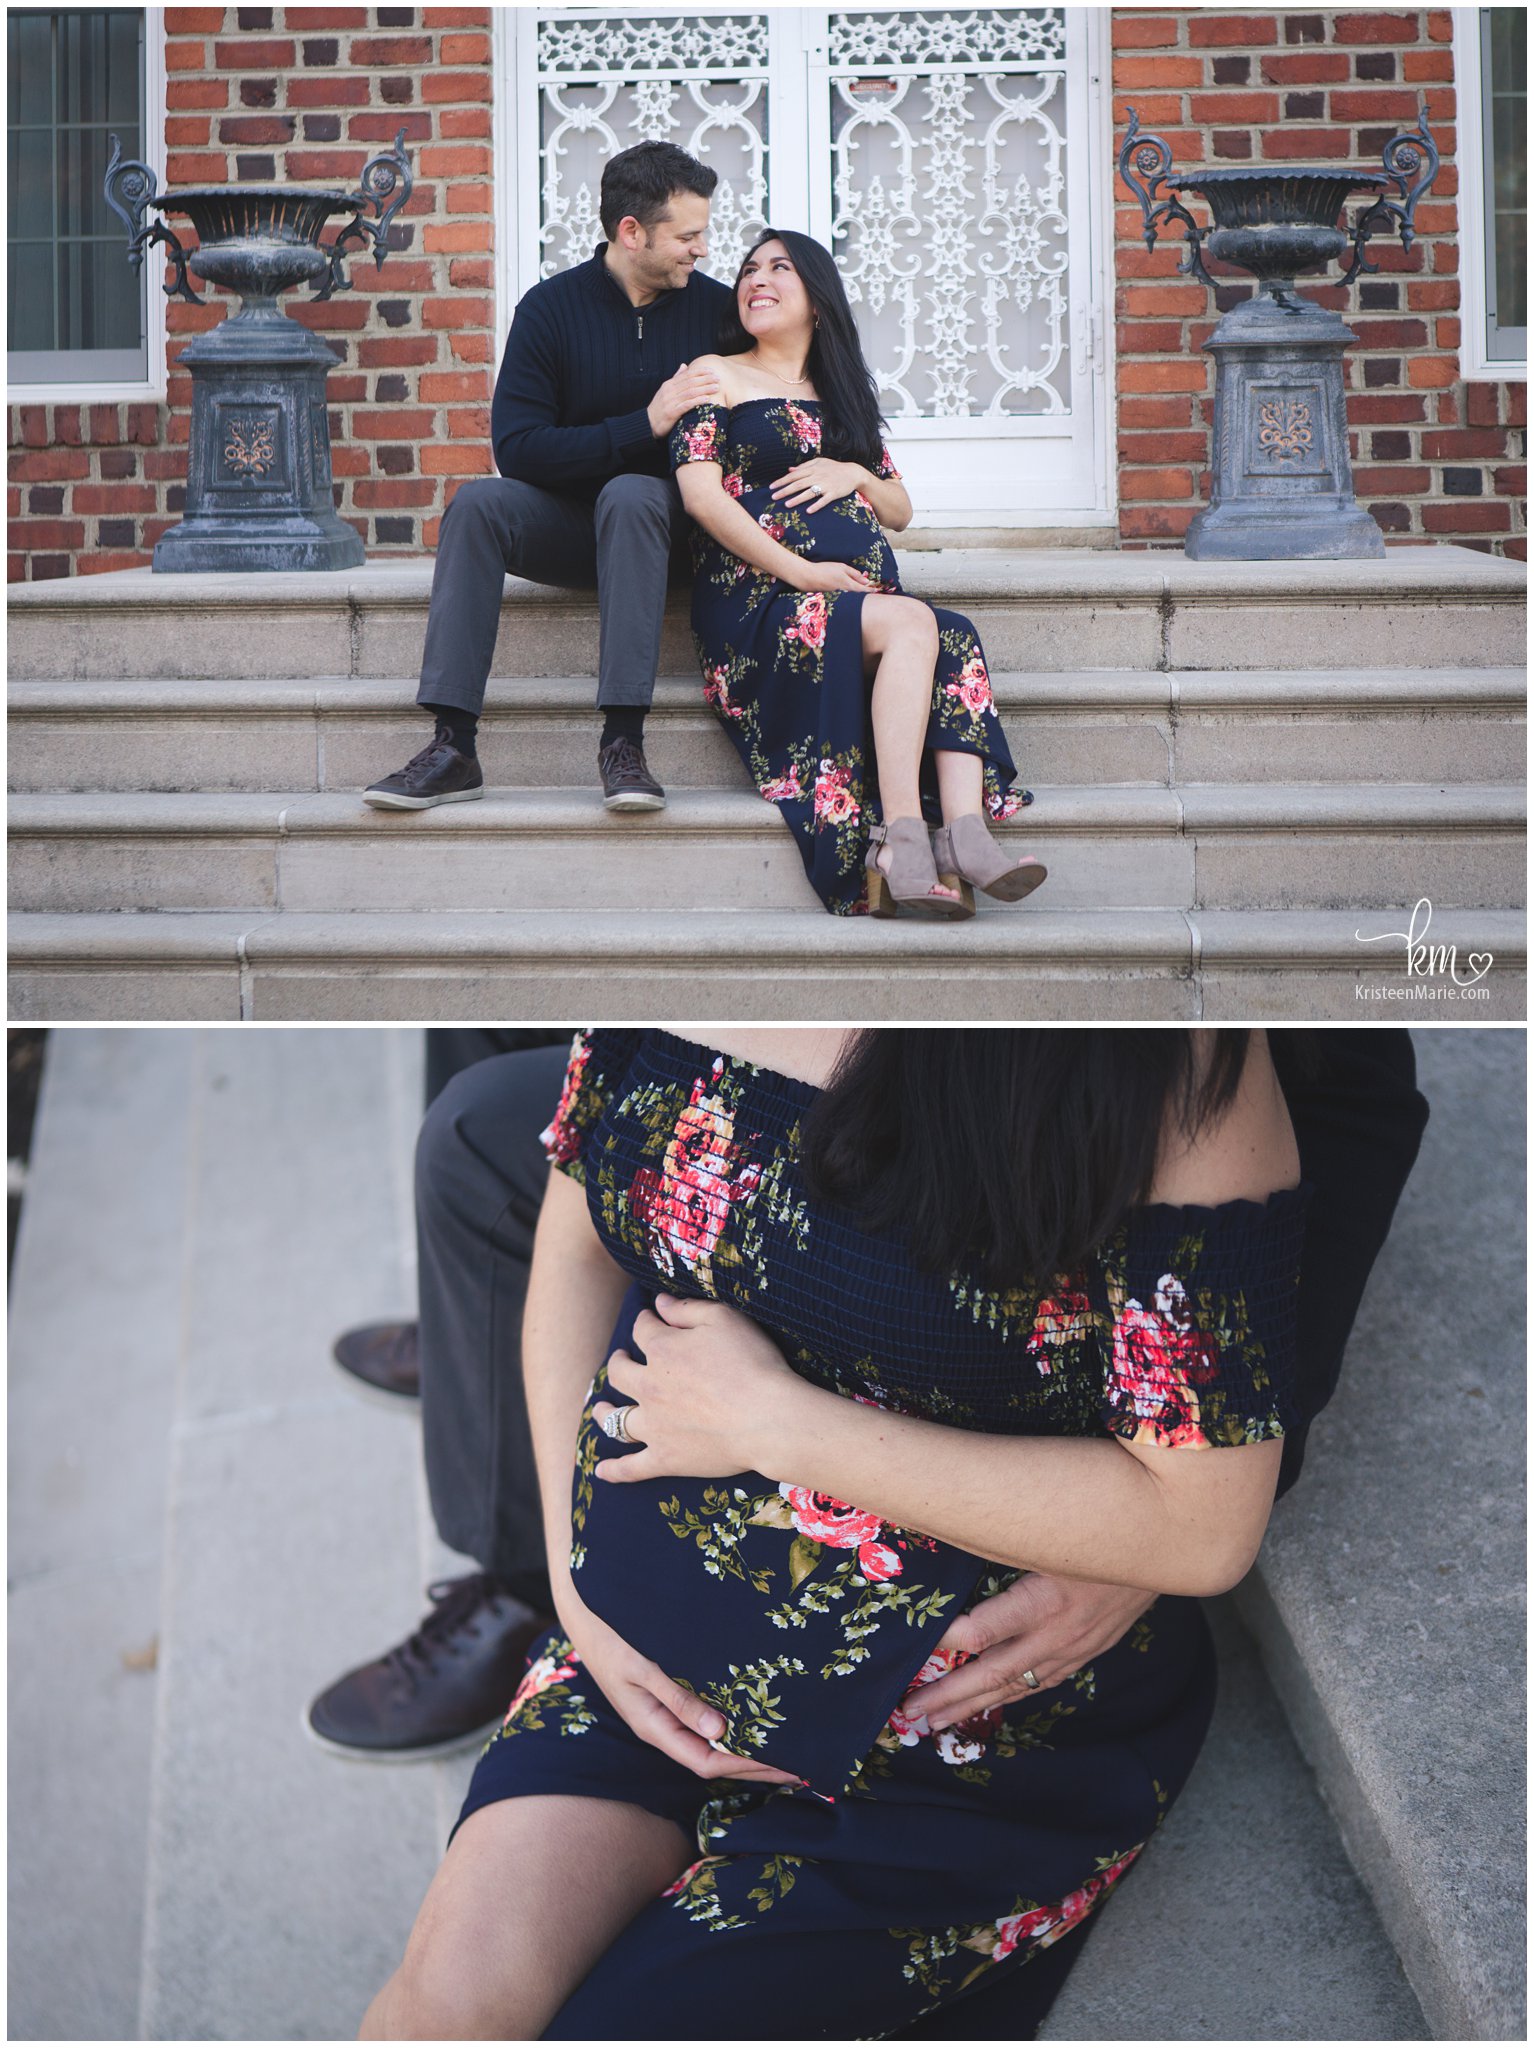 Maternity and newborn photography in Indianapolis, IN